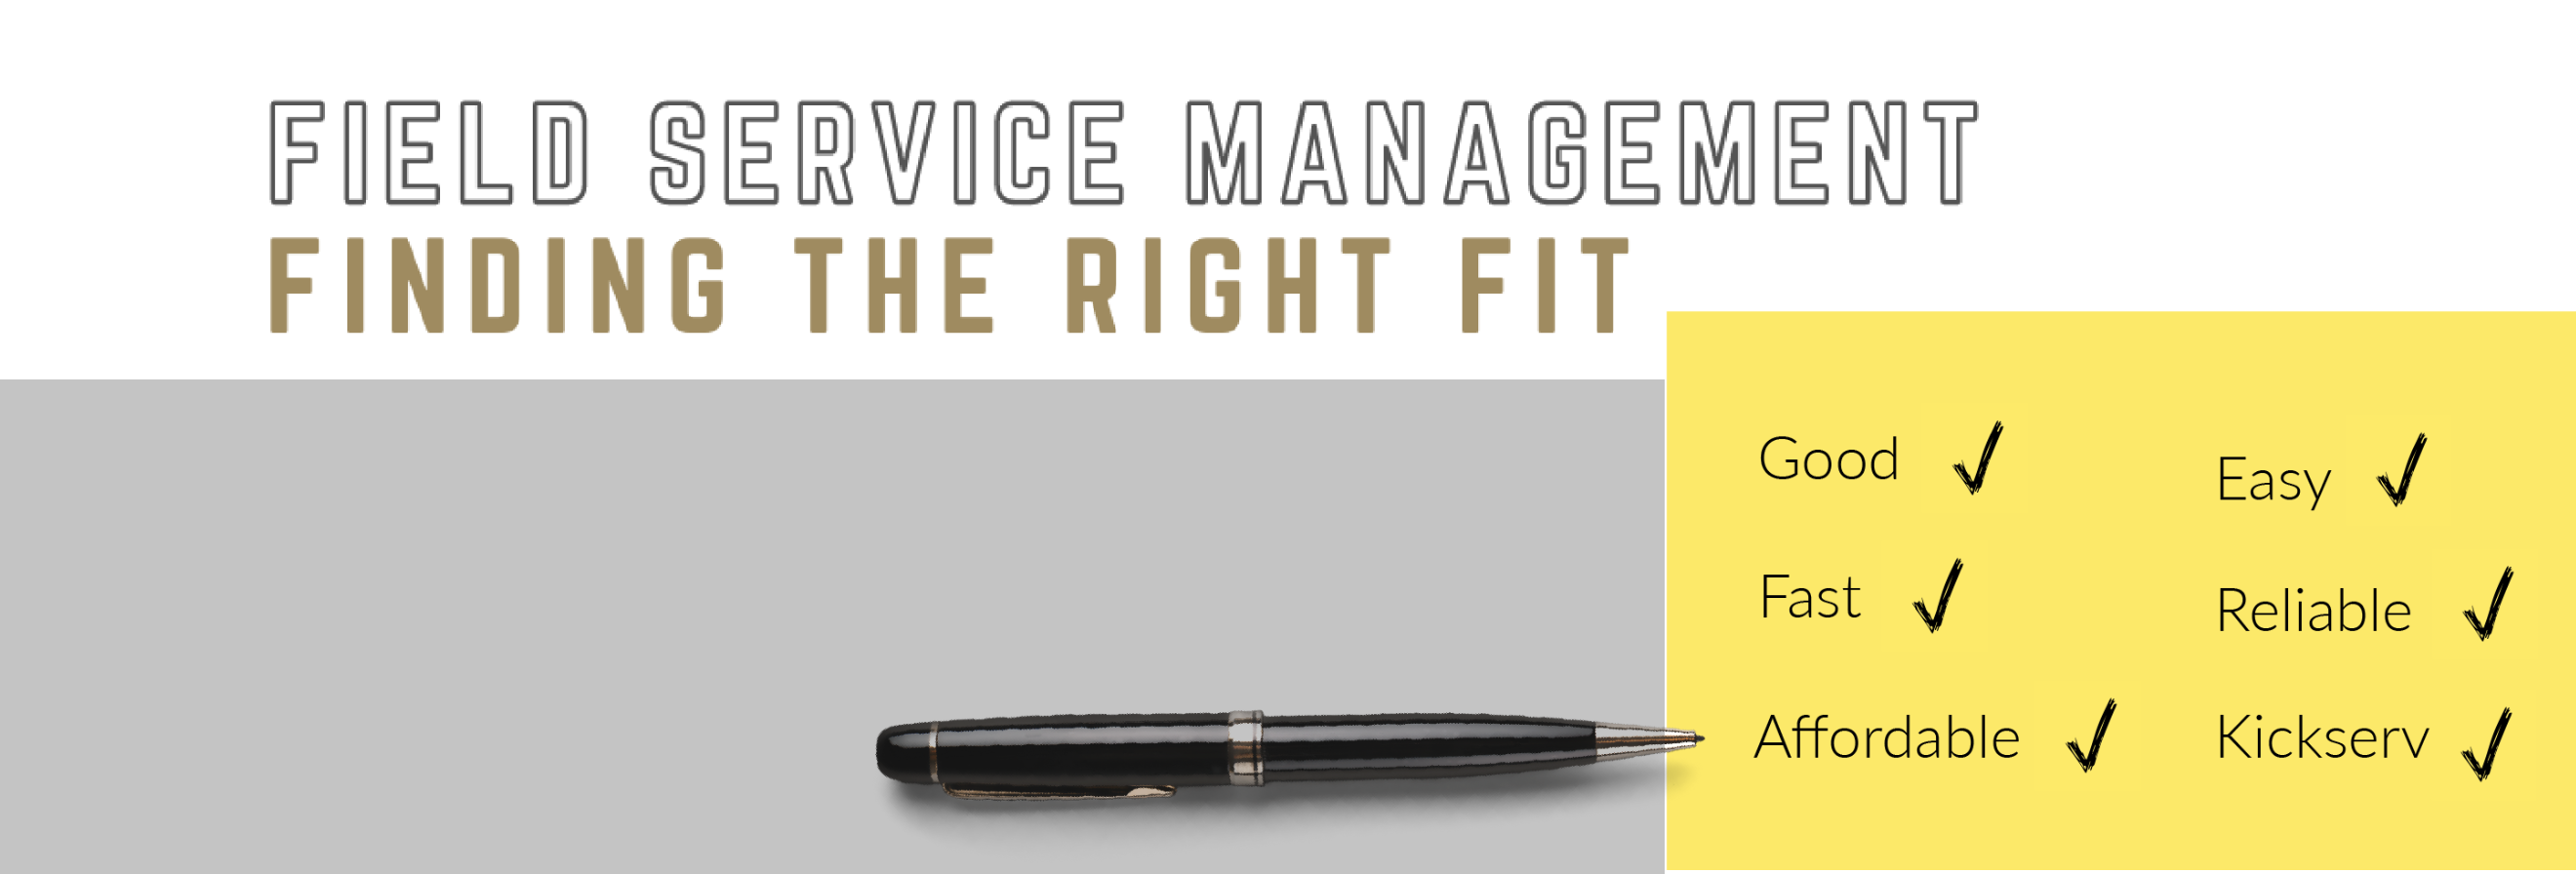 Field service management software for small business